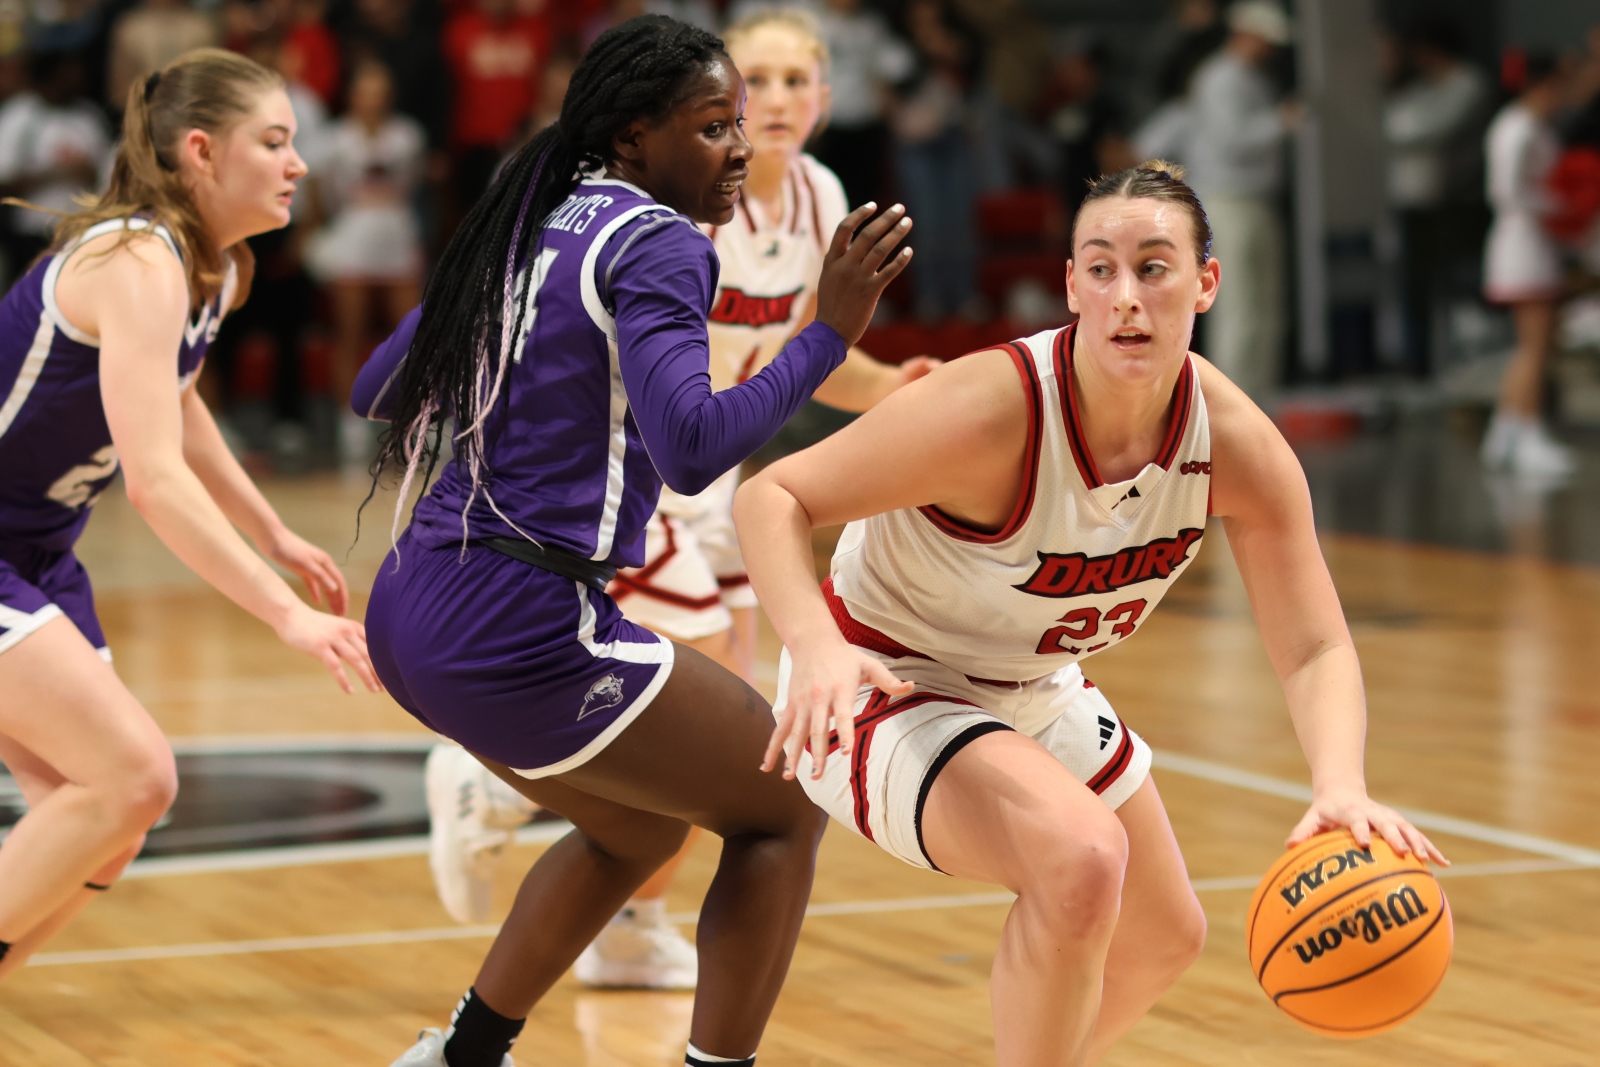 Reese Schaaf, wearing a Drury Lady Panthers basketball uniform, dribbles past a defender during a game.